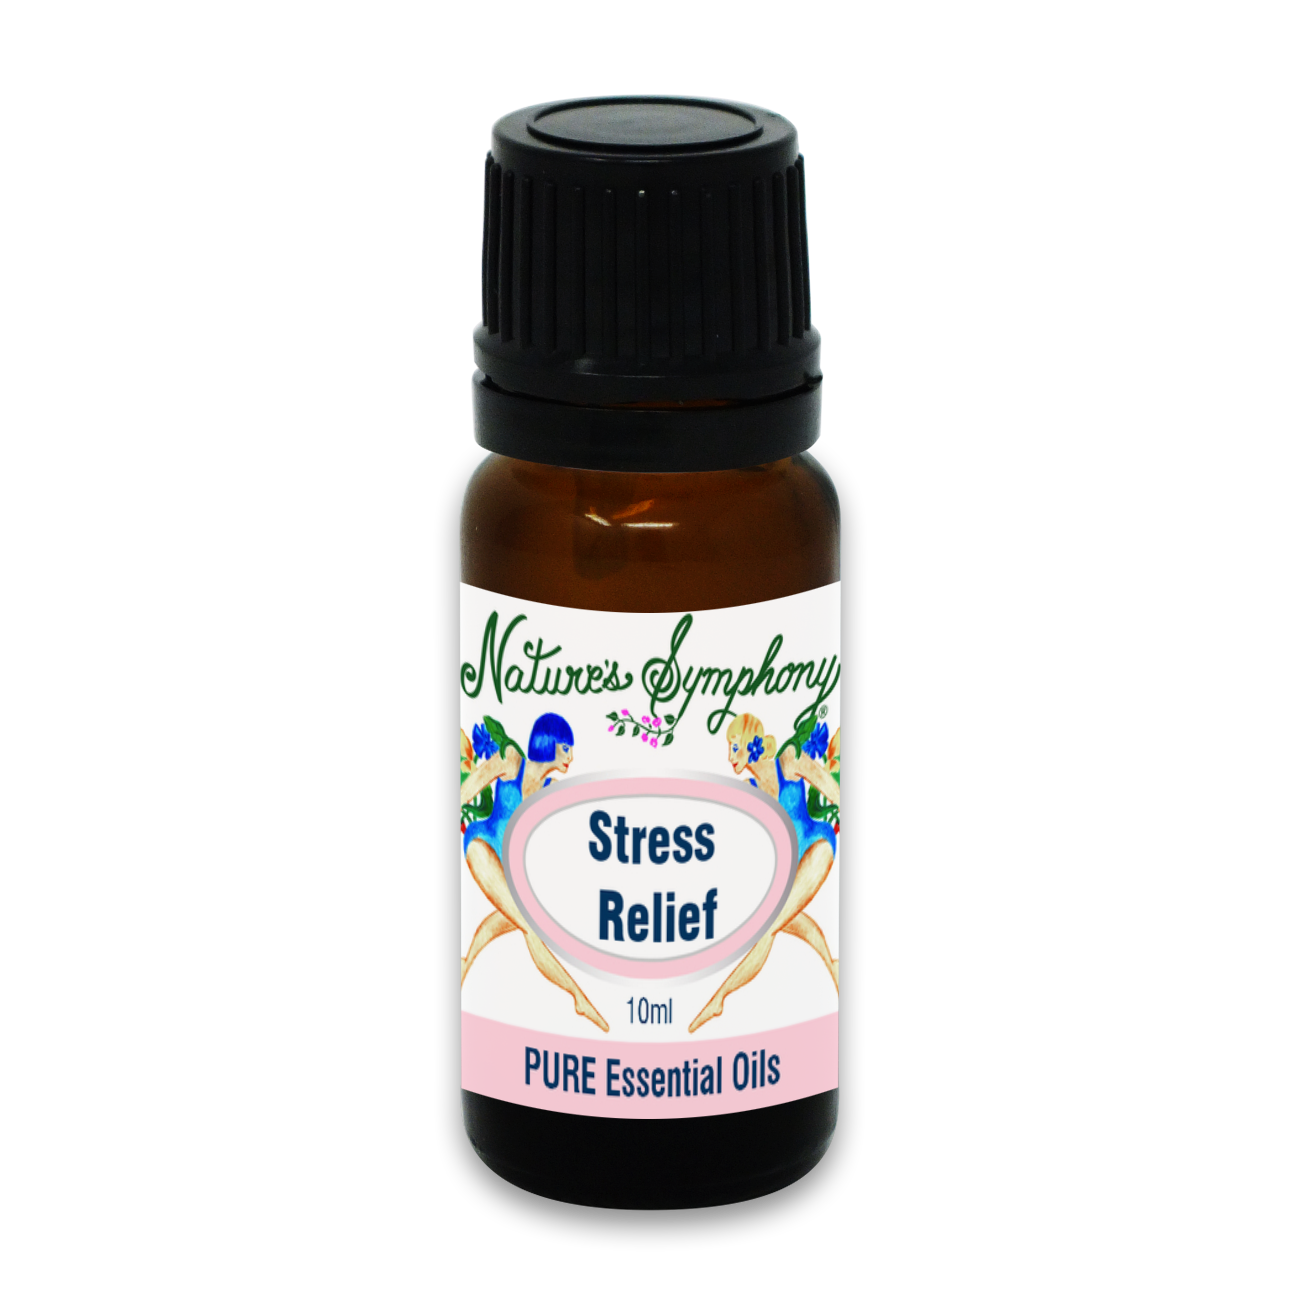 Stress Relief, Ambiance Diffusion blend - 10ml